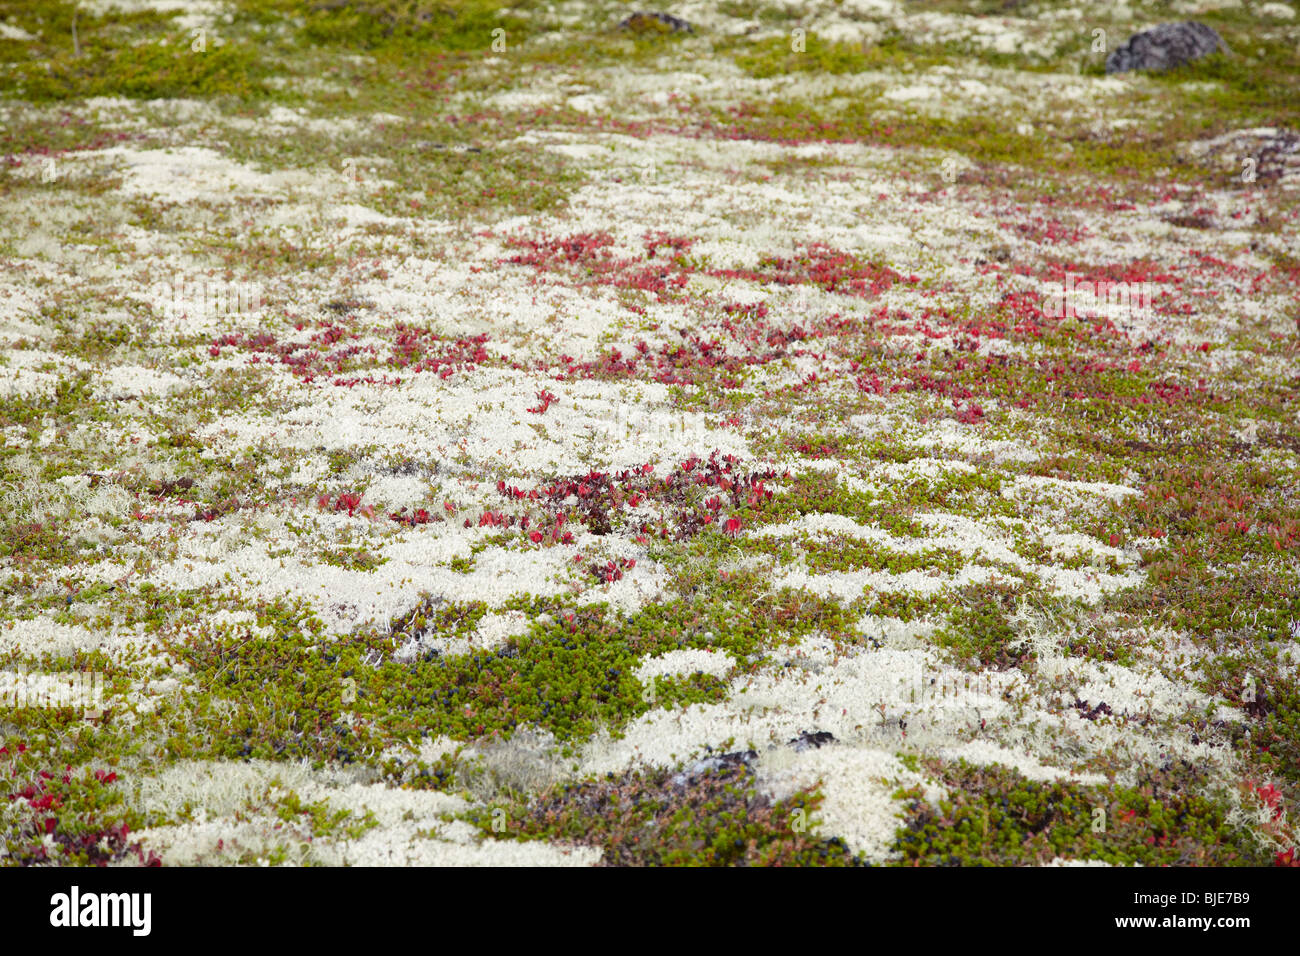 The surface of the ground covered by multicolored mosses and lichens - northern tundra Stock Photo